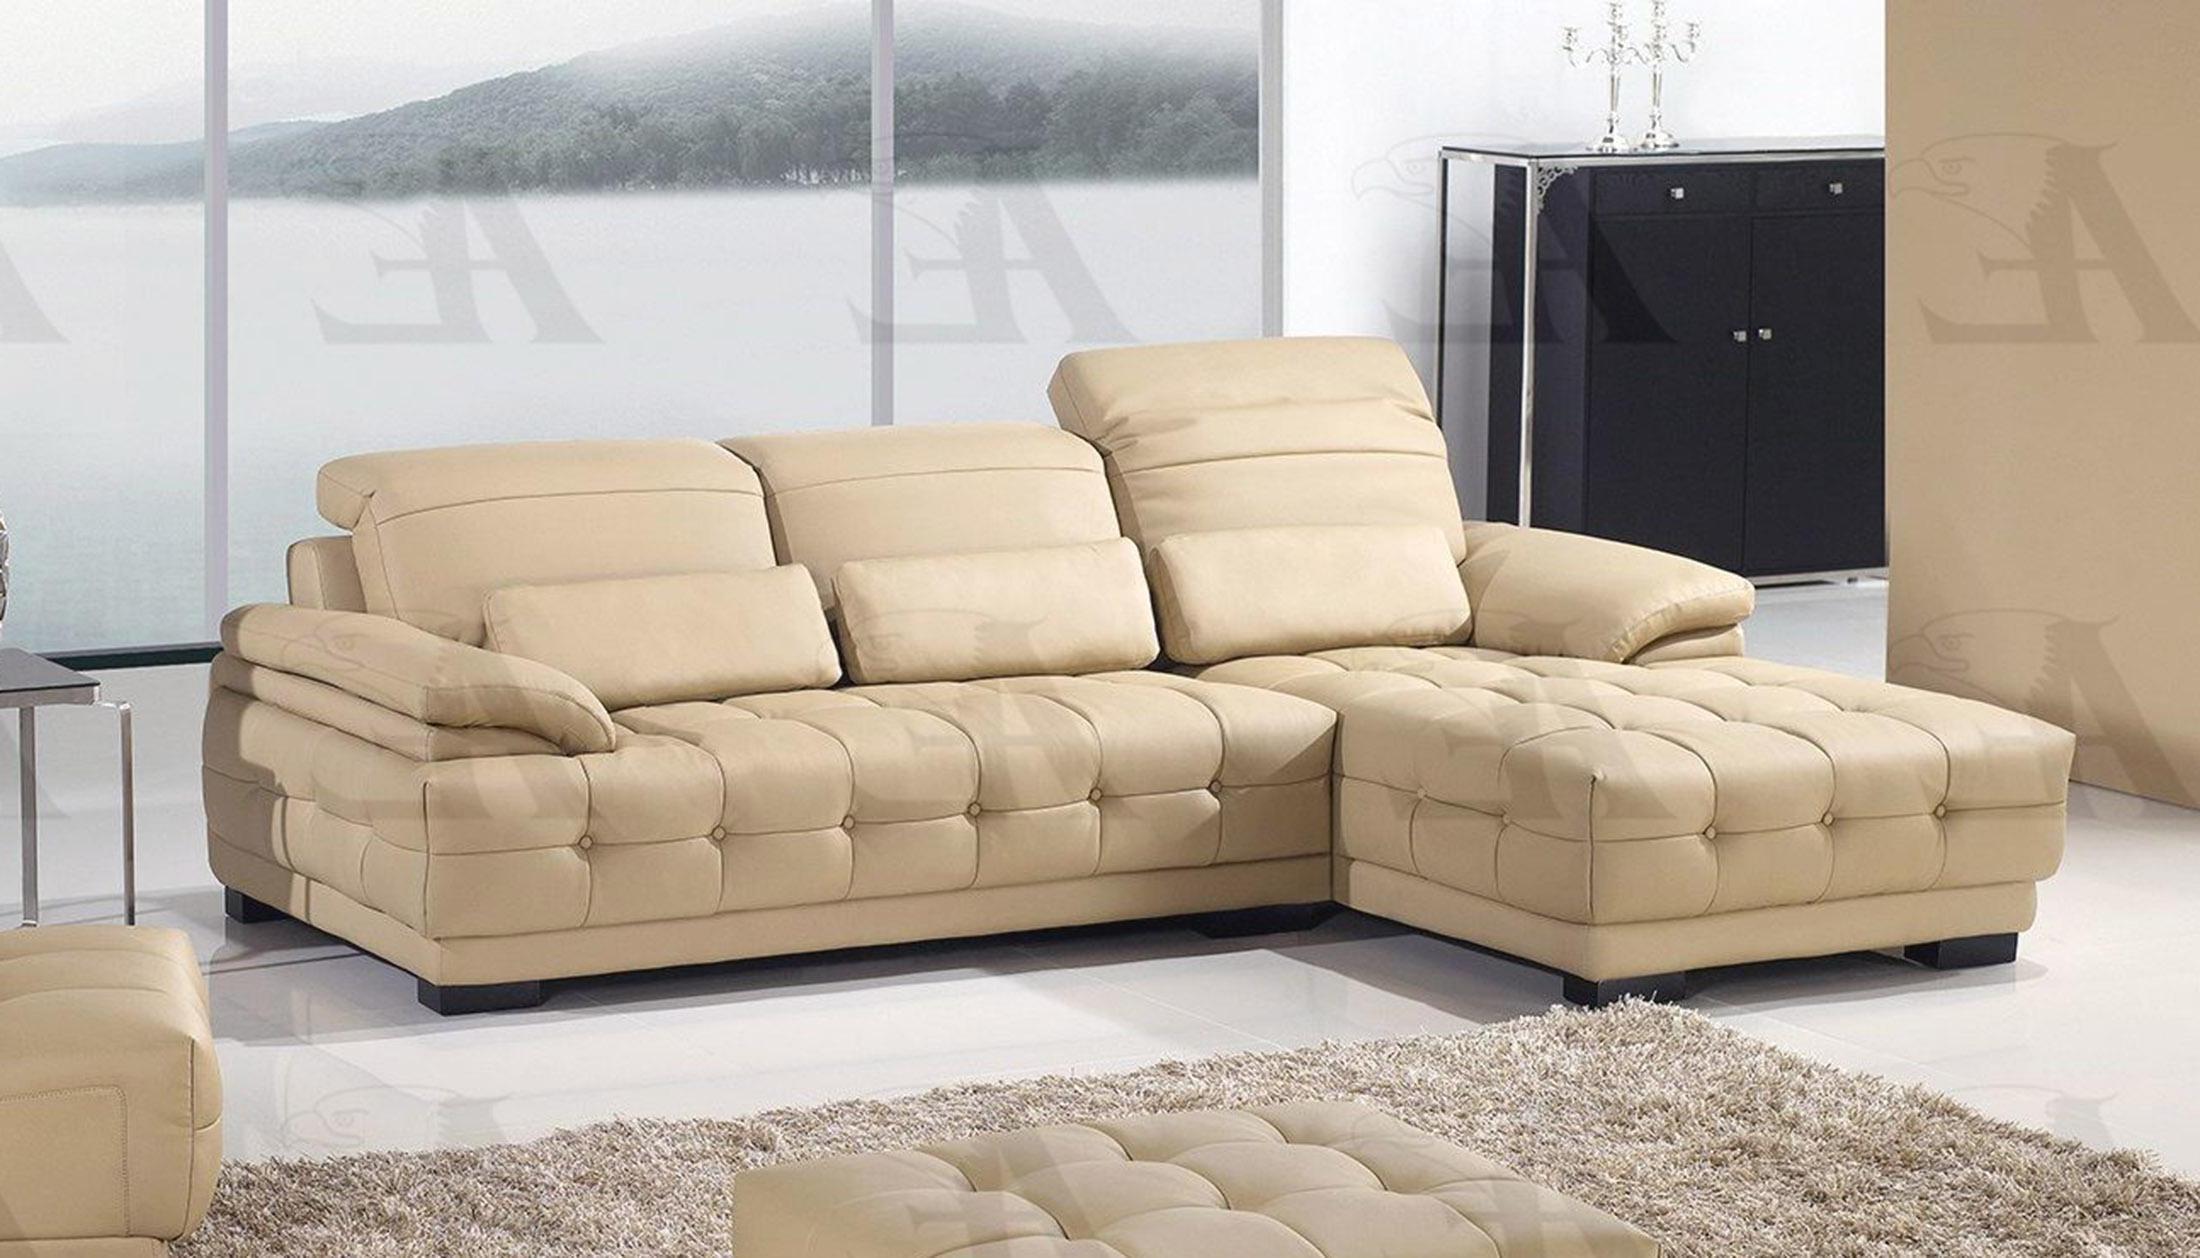 

                    
American Eagle Furniture AE-L296-BK Sofa Chaise Chair and Ottoman Set Tan Bonded Leather Purchase 
